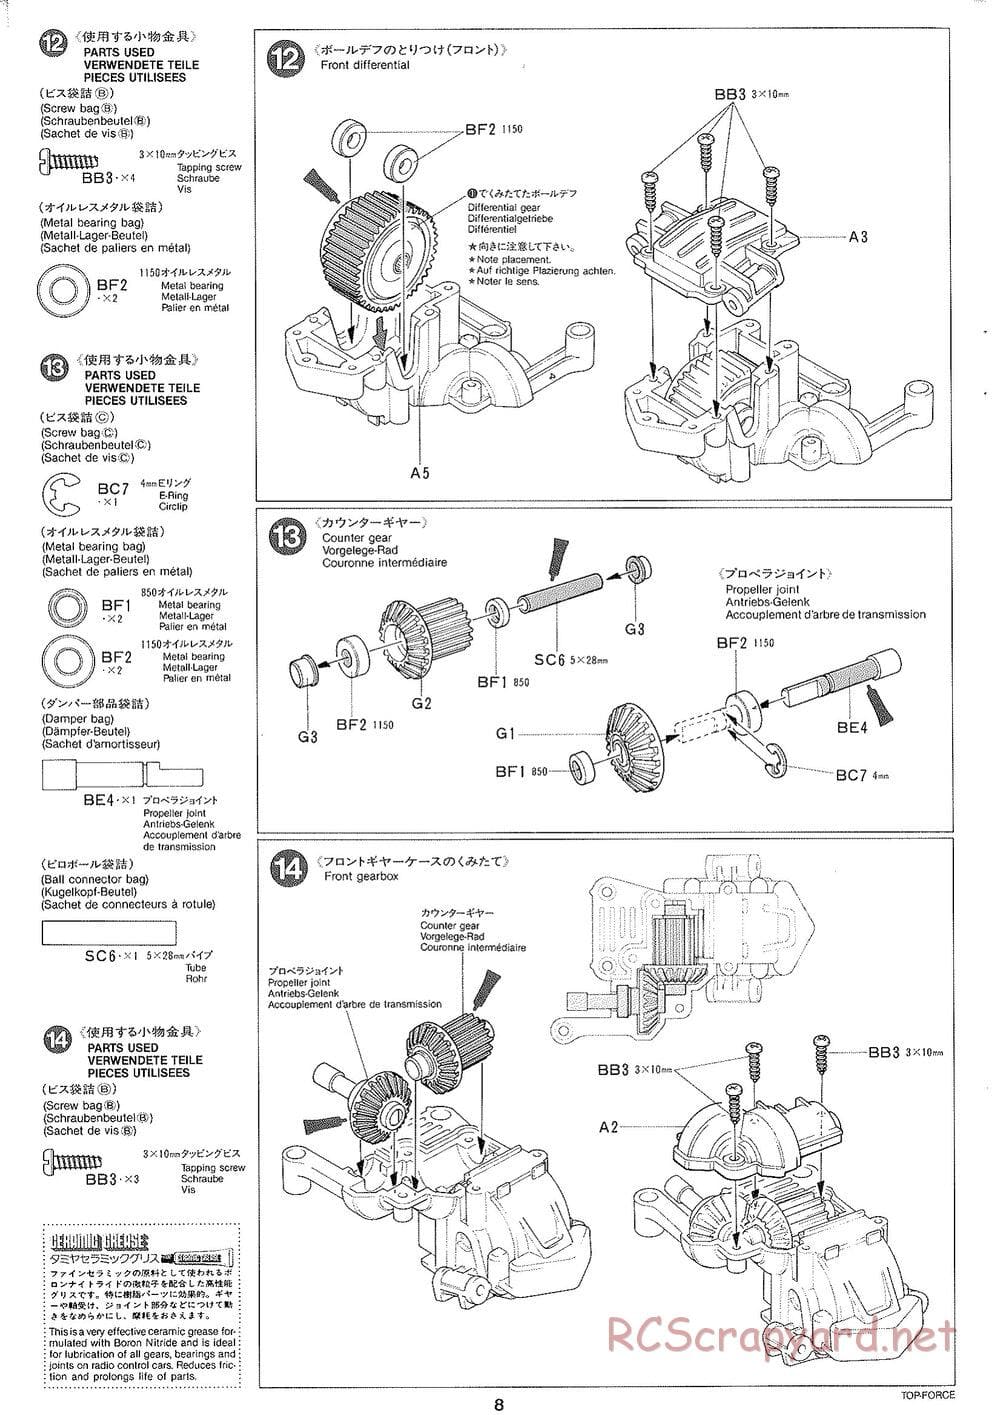 Tamiya - Top Force 2005 - DF-01 Chassis - Manual - Page 8